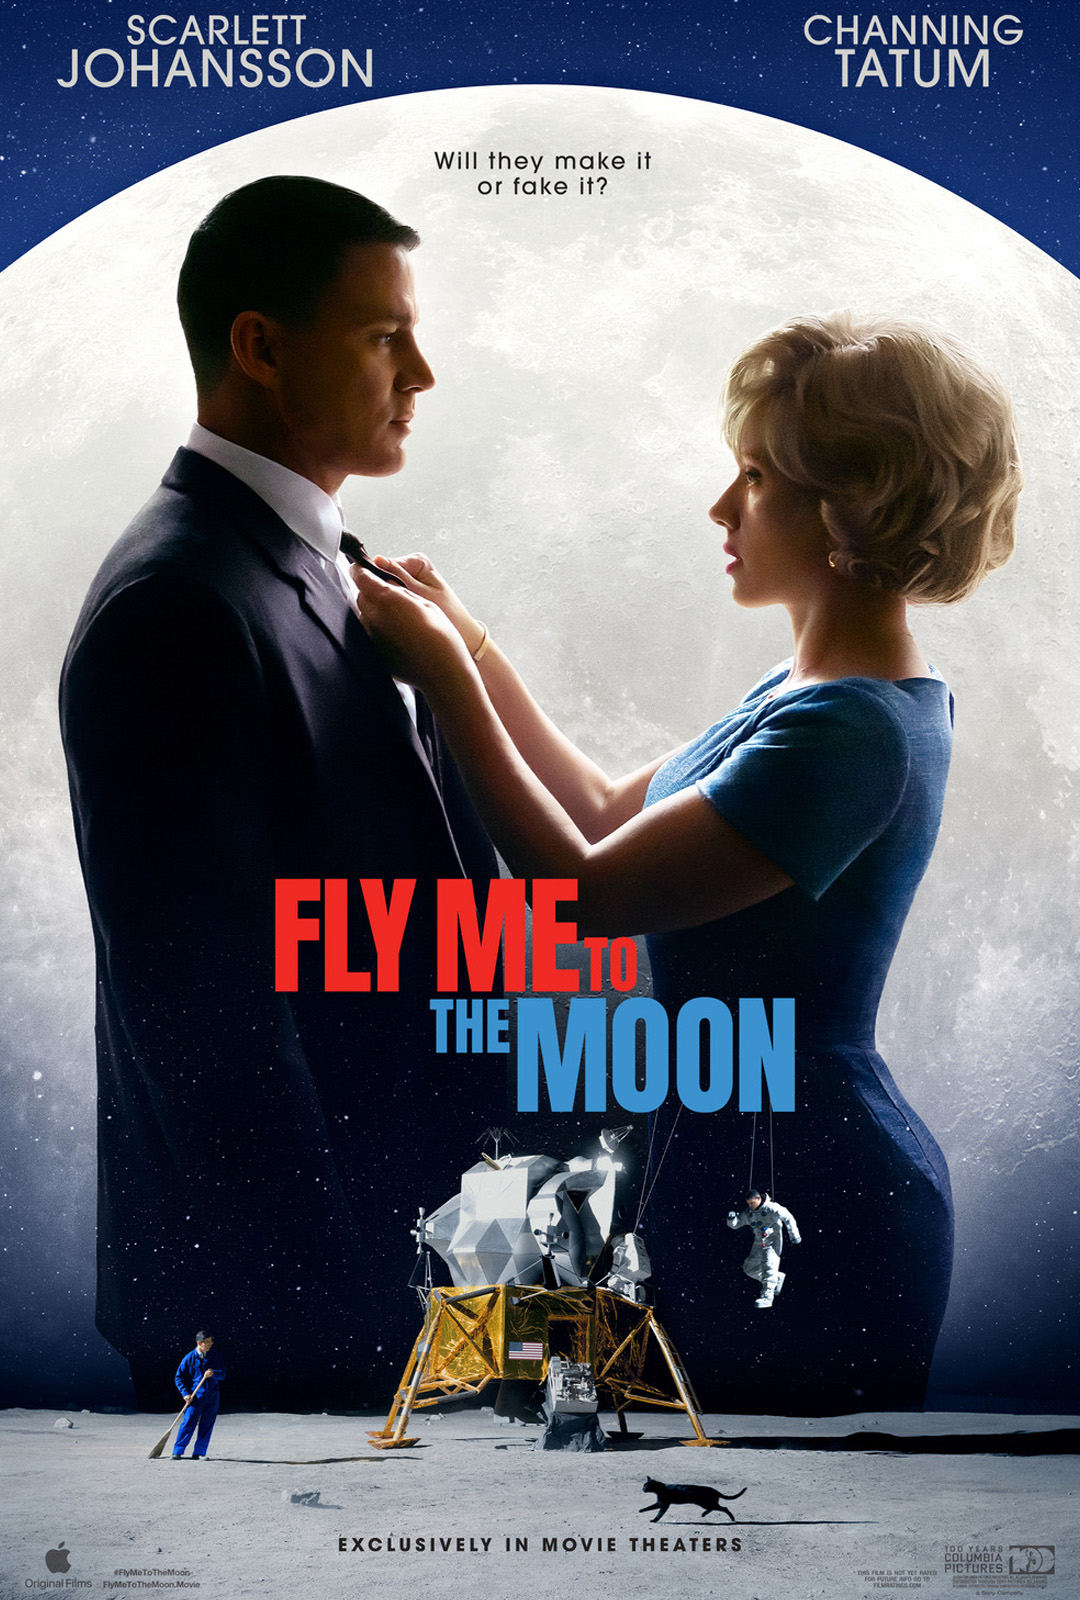 Movie Poster: Fly Me to the Moon